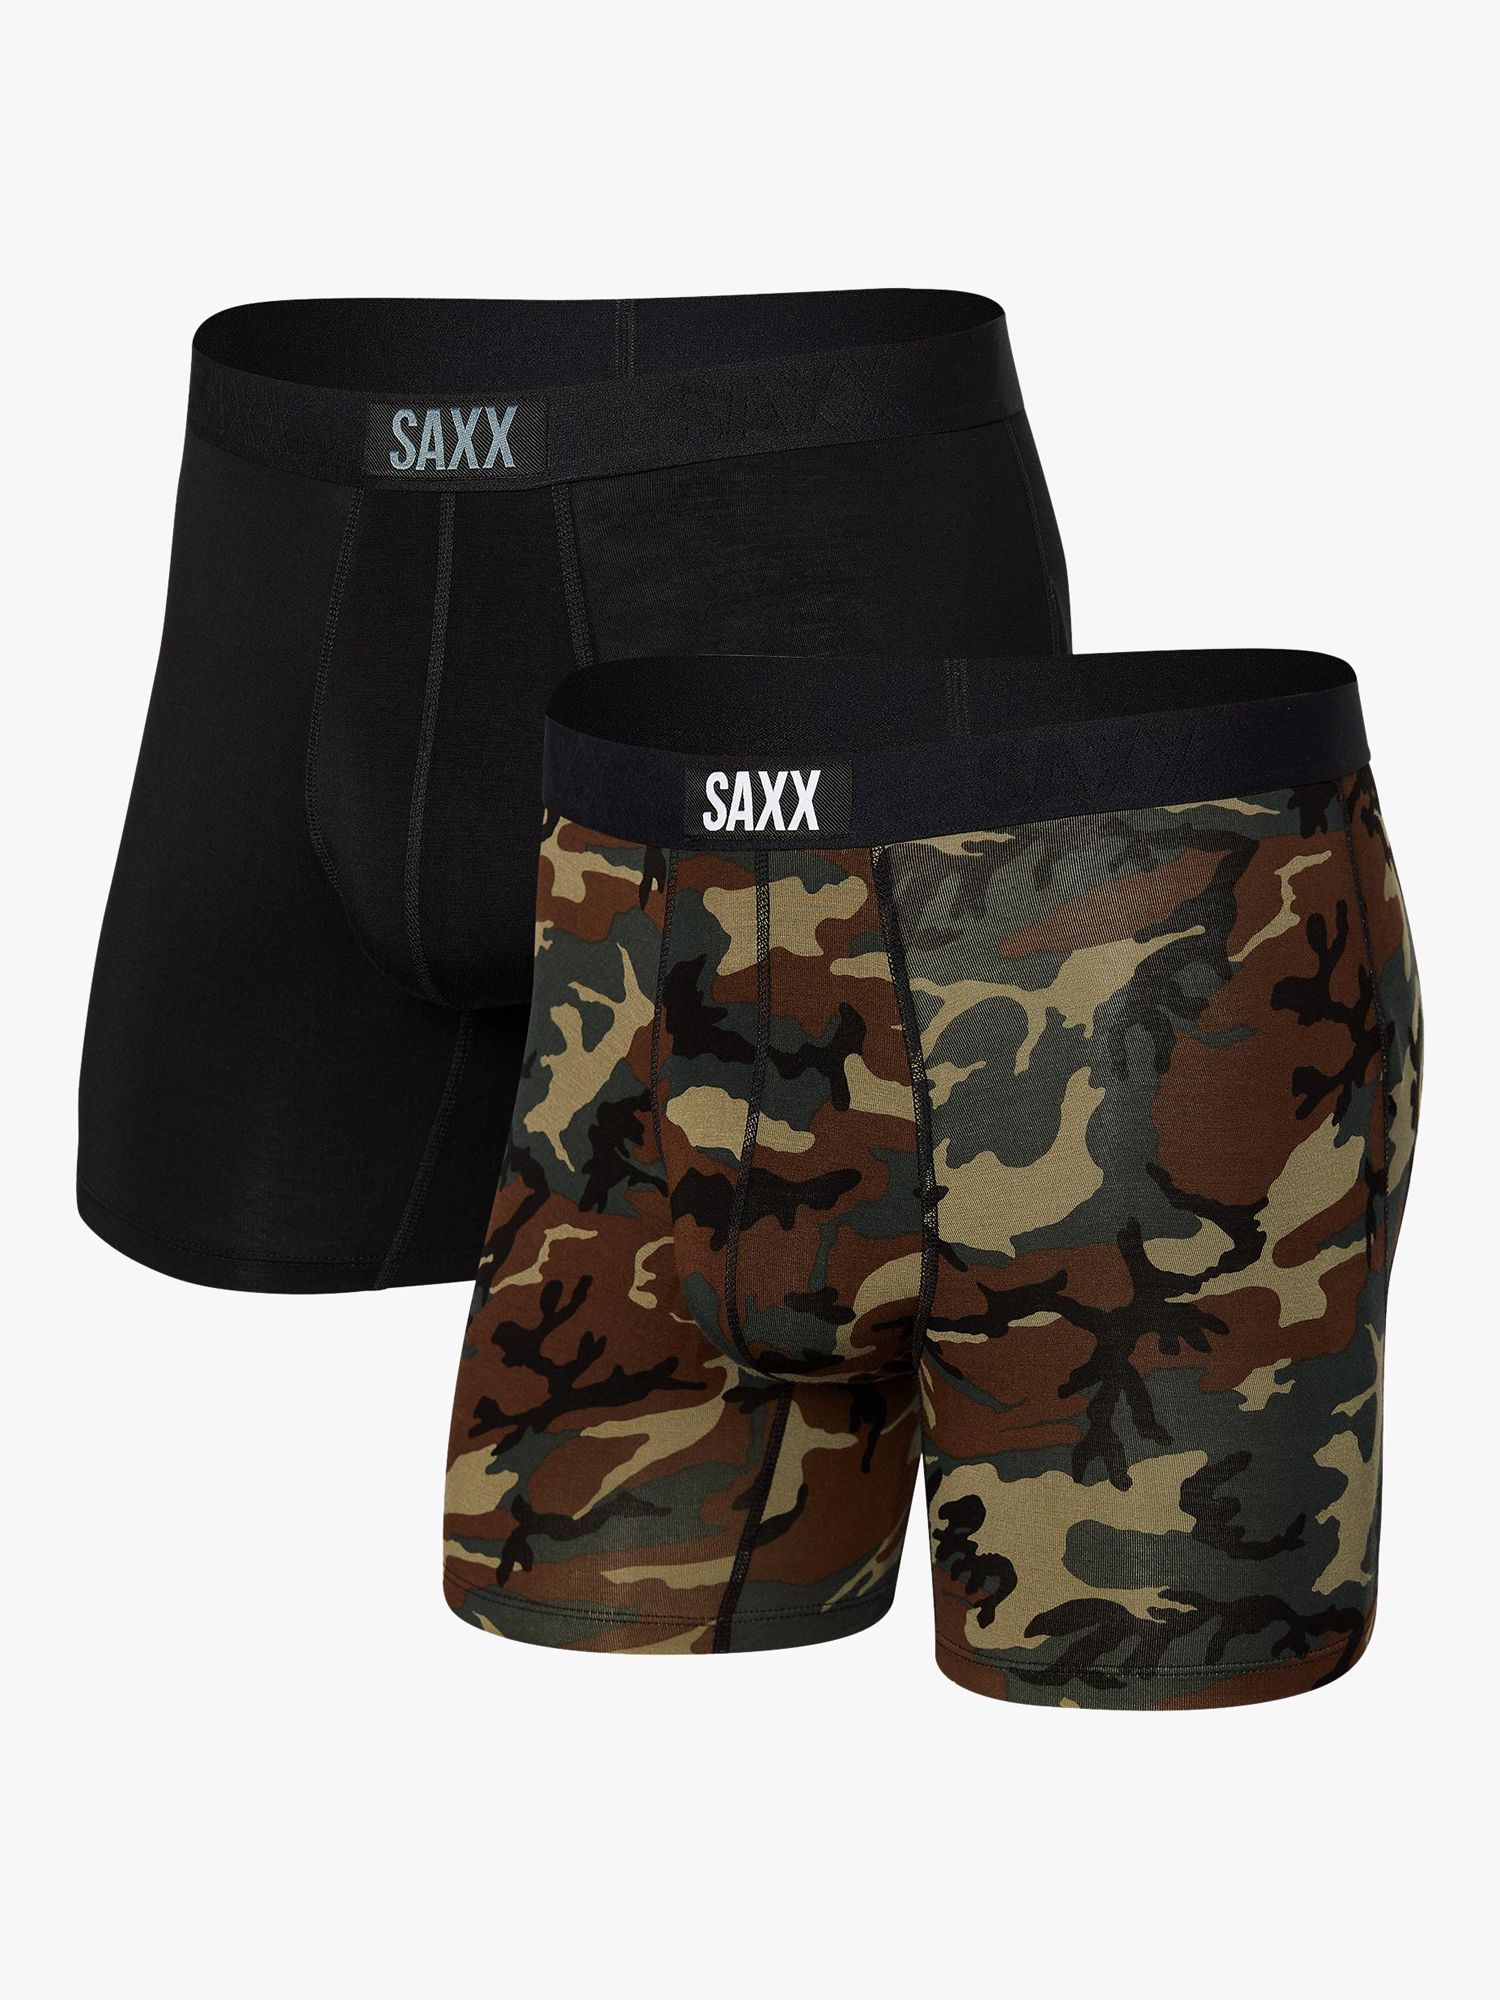 SAXX Vibe Slim Fit Woodland Camouflage & Plain Trunks, Pack of 2,  Black/Multi, S